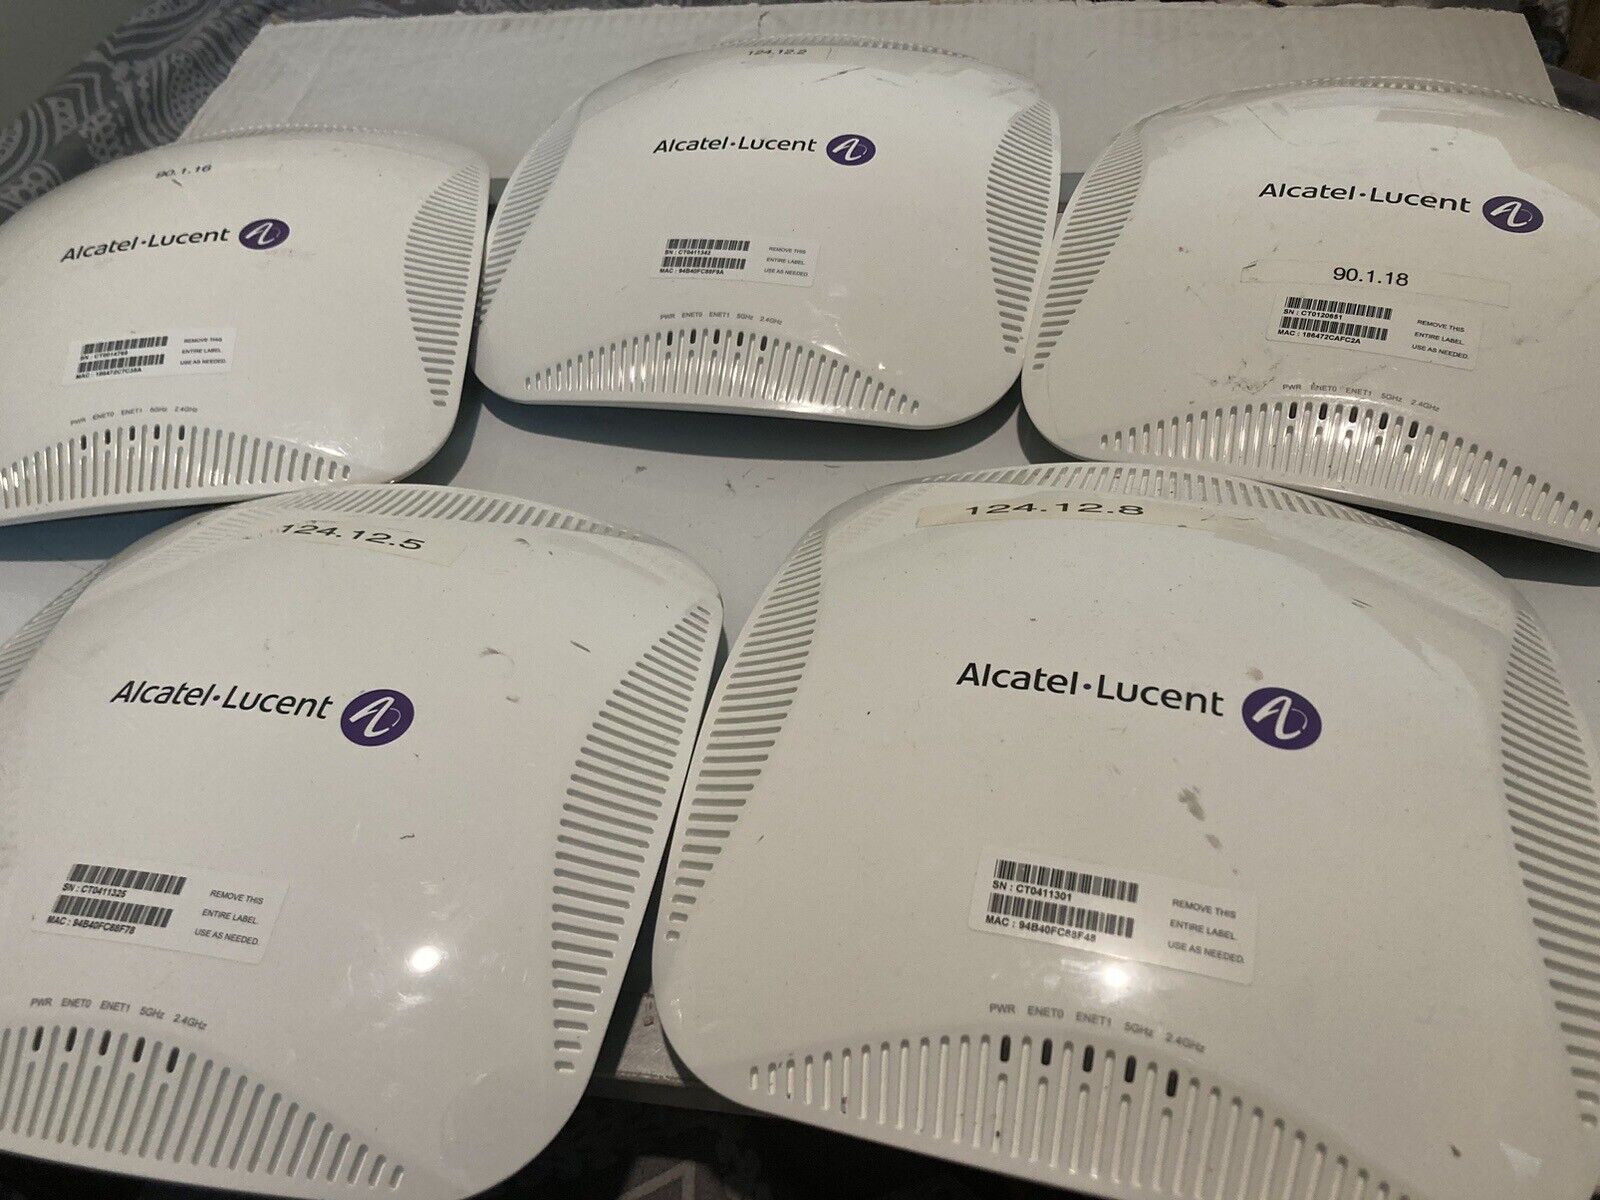 Lot of 5 Aruba/Alcatel-Lucent AP-225 1300Mbps Wireless Access Point APIN0225